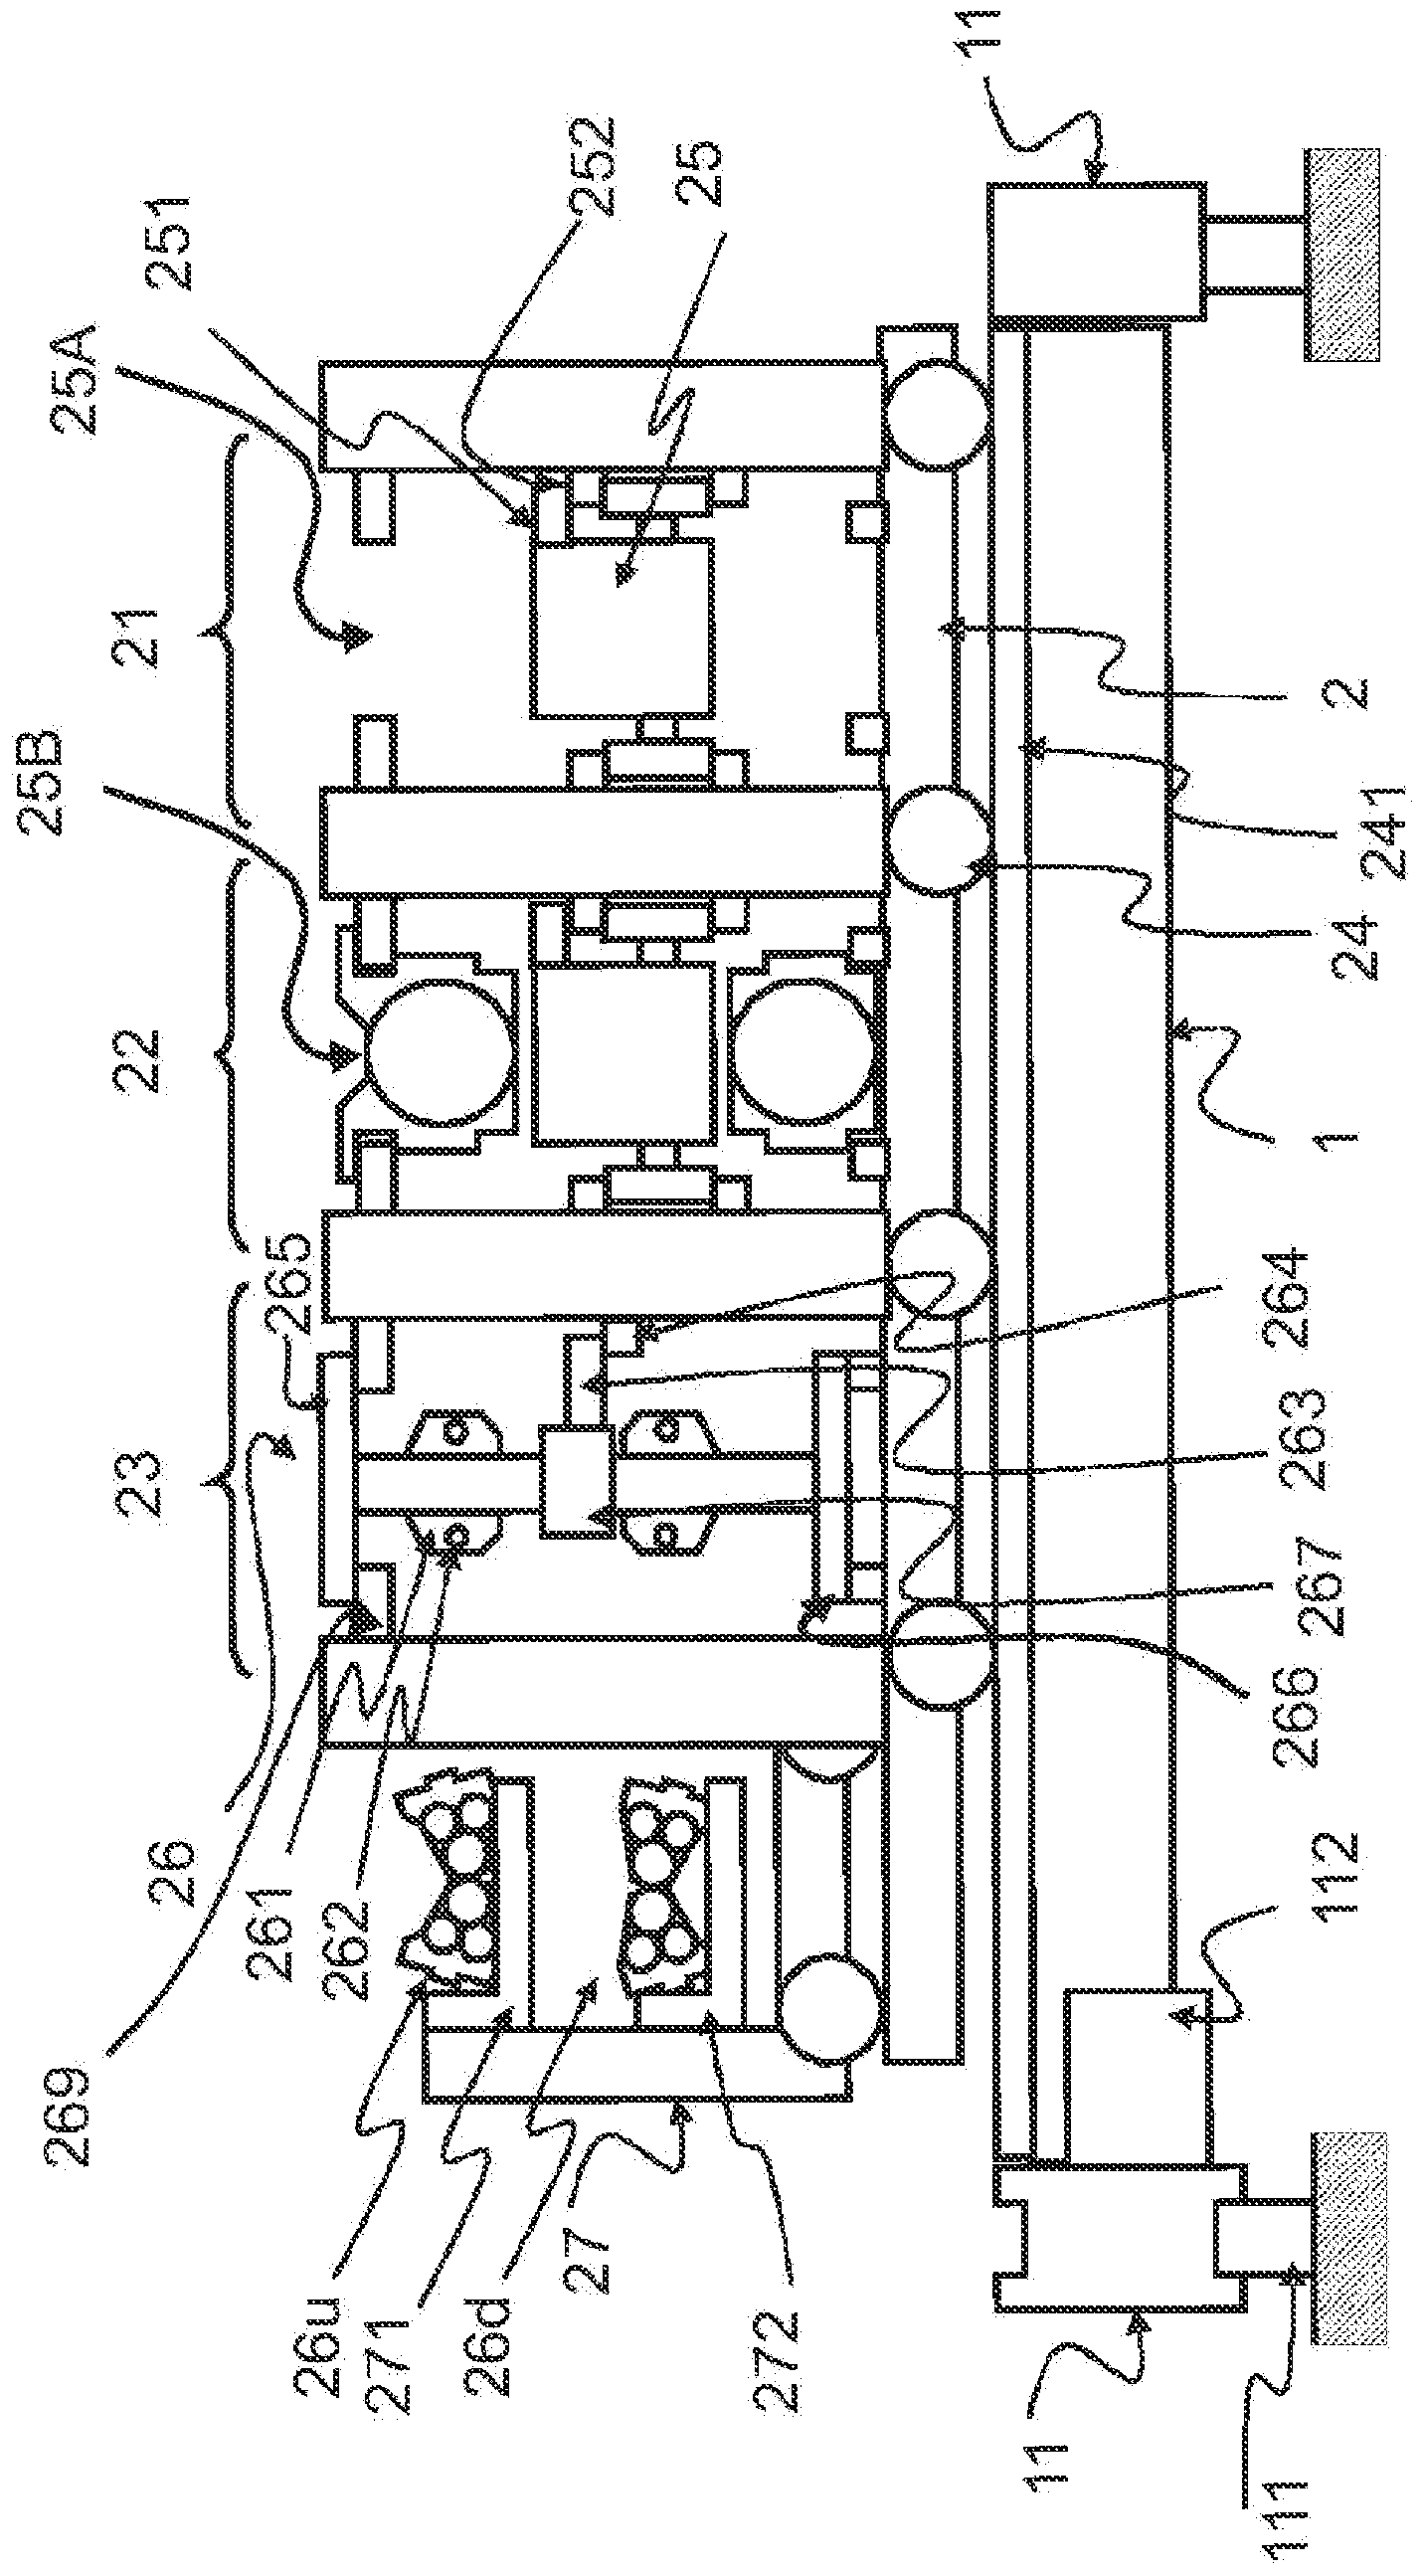 Equipment and method for changing cylinders and/or clusters of a roll stand